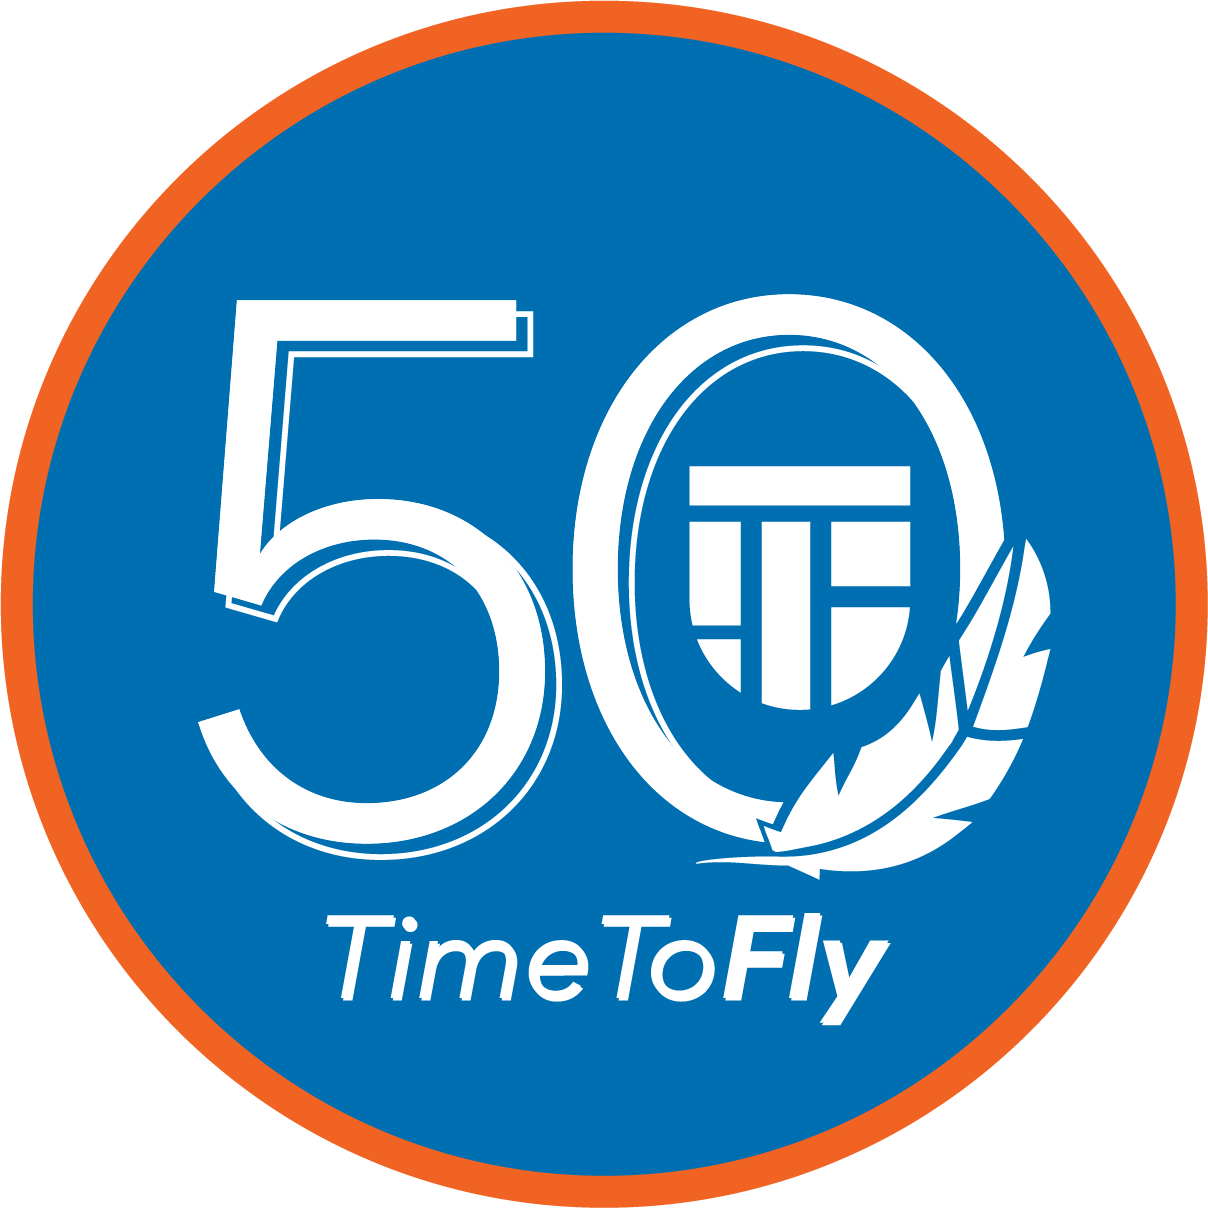 50 time to fly logo icon